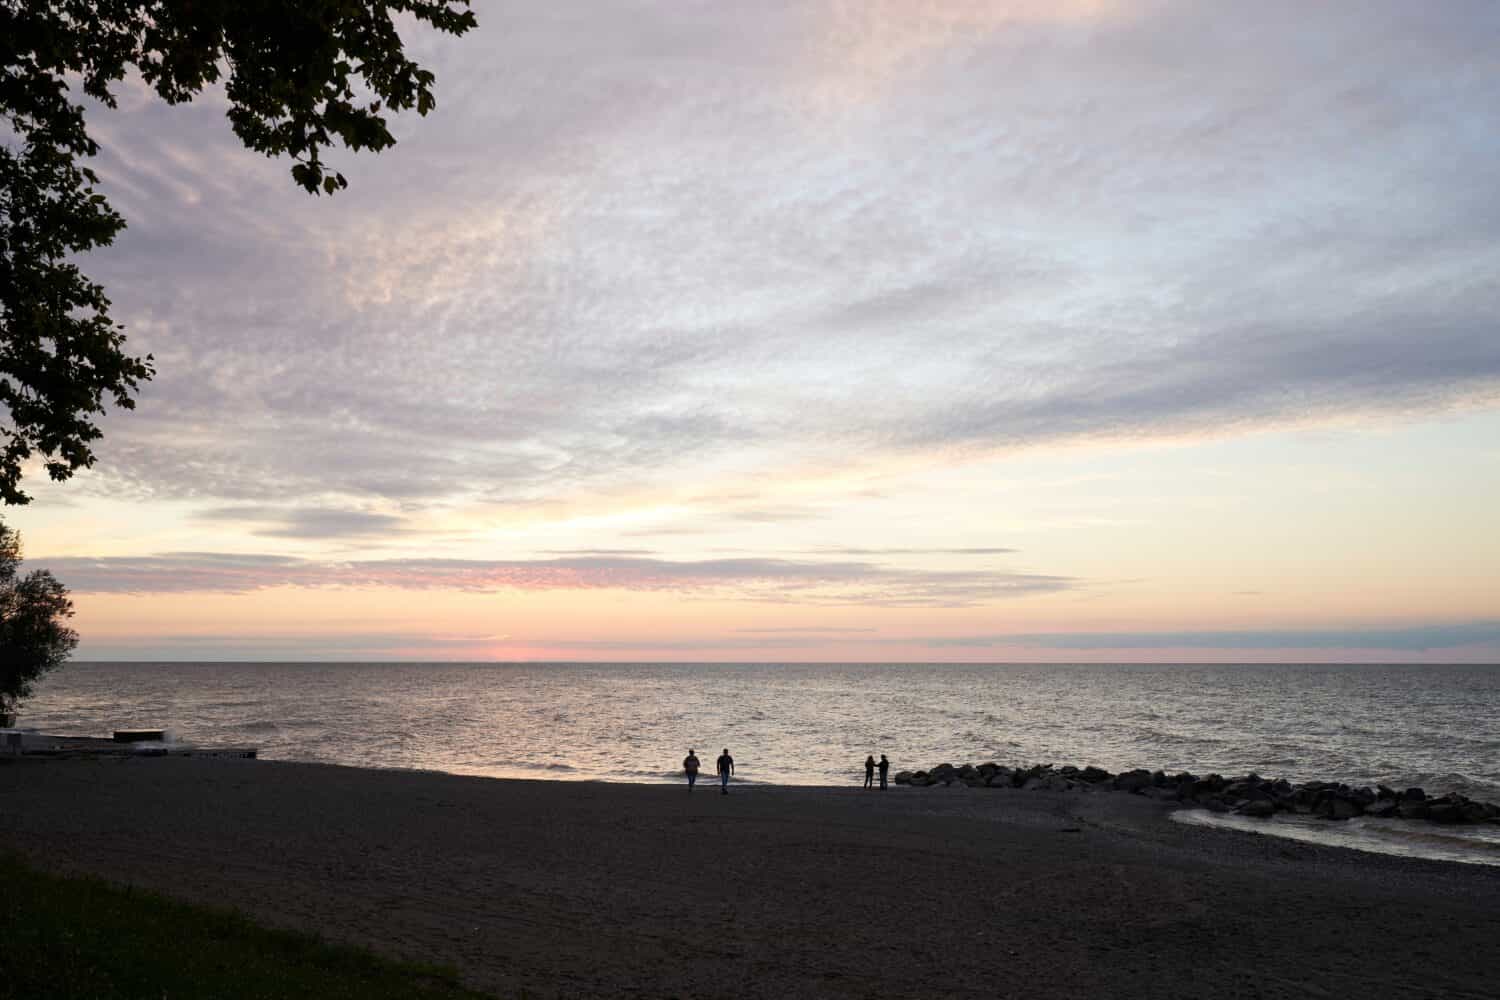 A quiet beach at Madison township park. Madison is a small town in Ohio on Lake Erie. Two couples are walking the coastline.